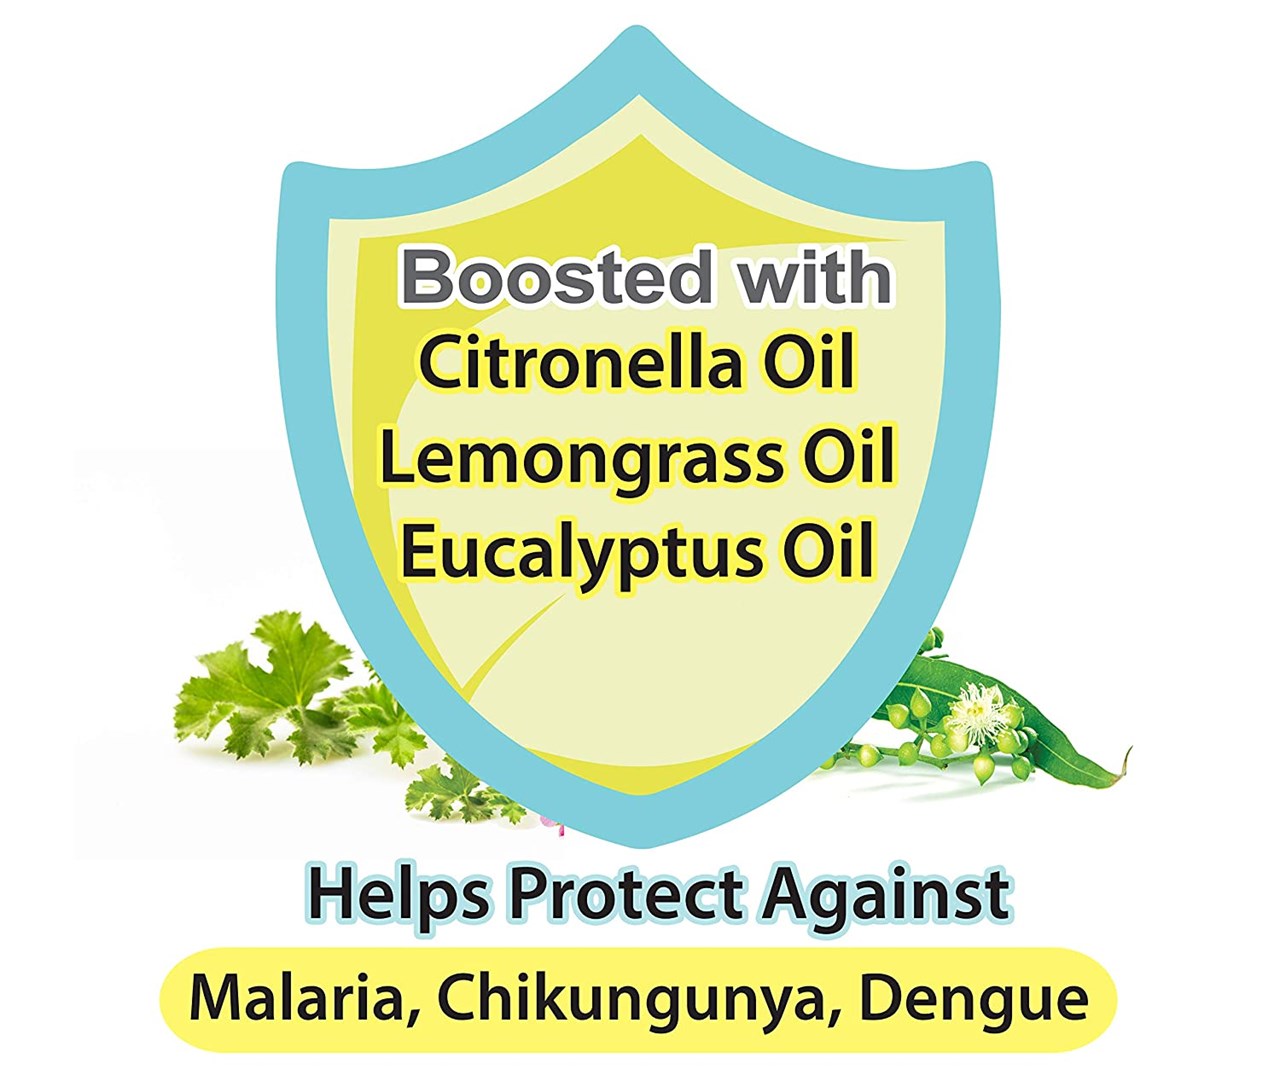 Picture of LuvLap Mosquito repellent spray 100 ml